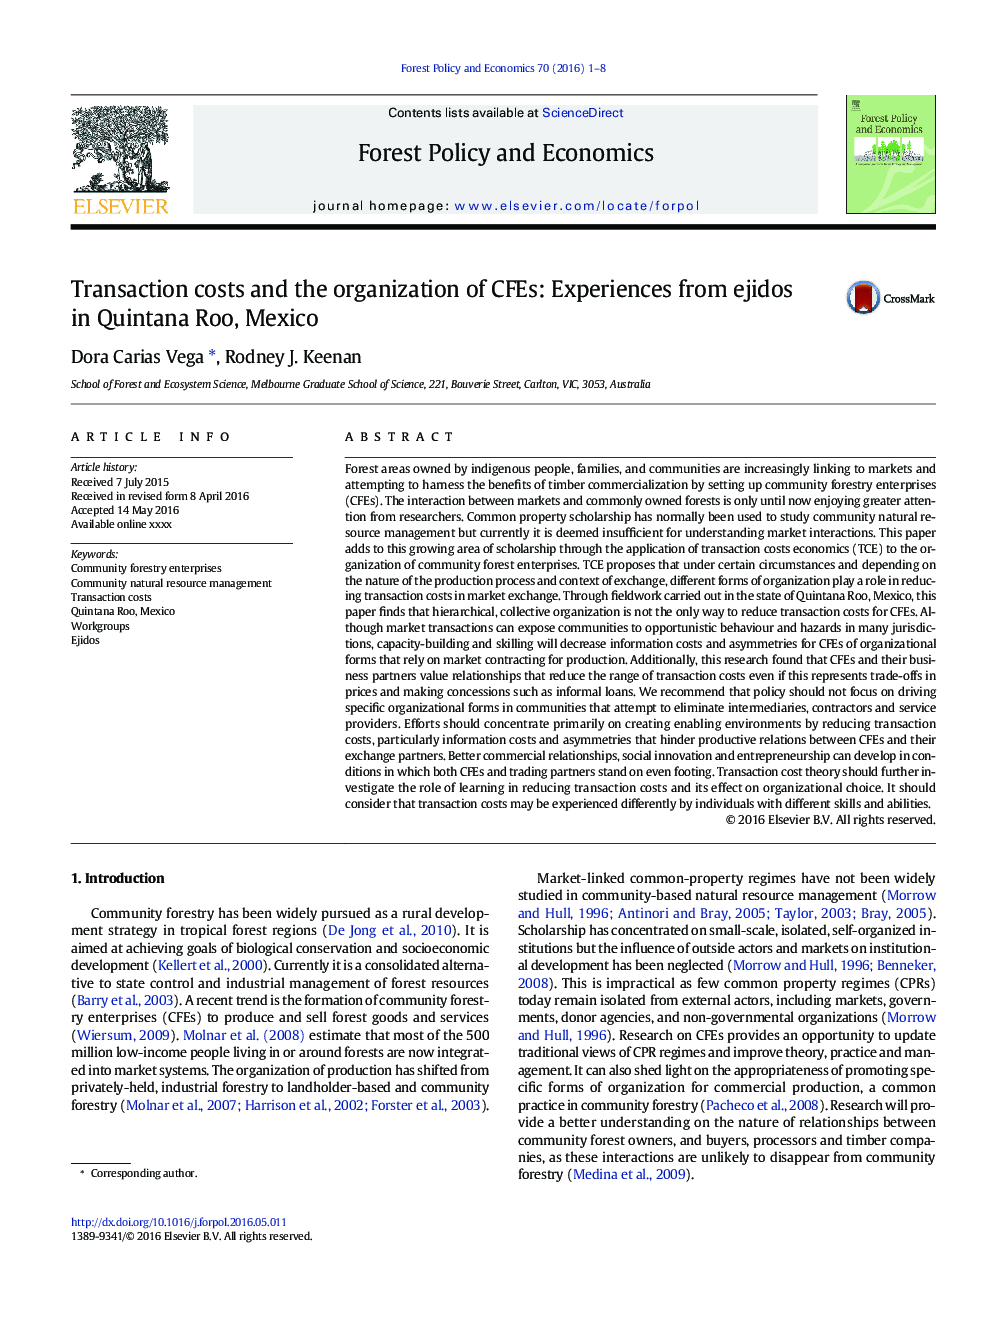 Transaction costs and the organization of CFEs: Experiences from ejidos in Quintana Roo, Mexico